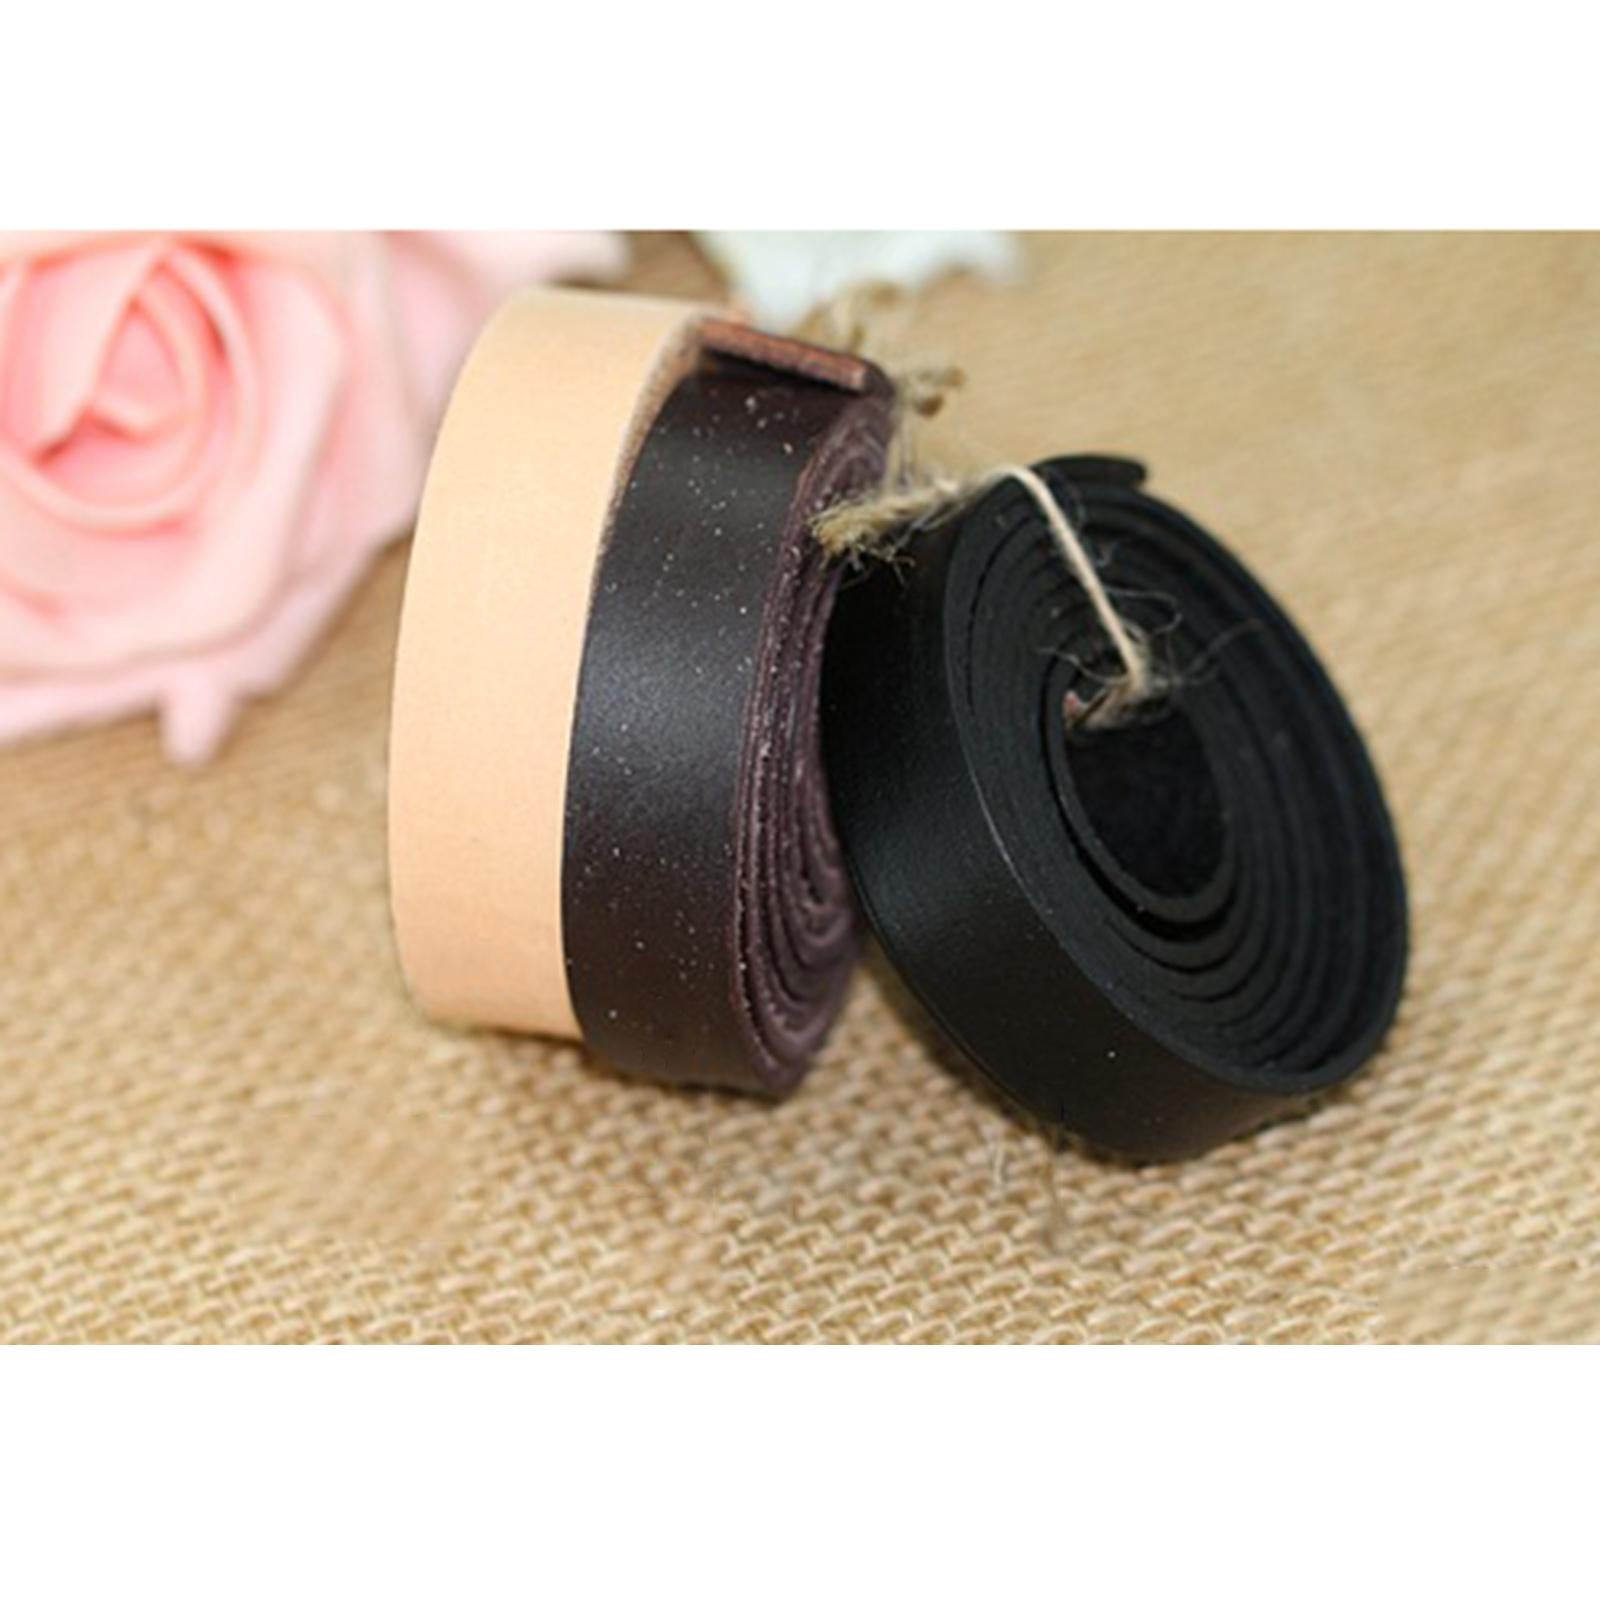 PU Leather Strips Pets Collars 2x80cm Straps Crafting Sewing Keychain Belt Brown